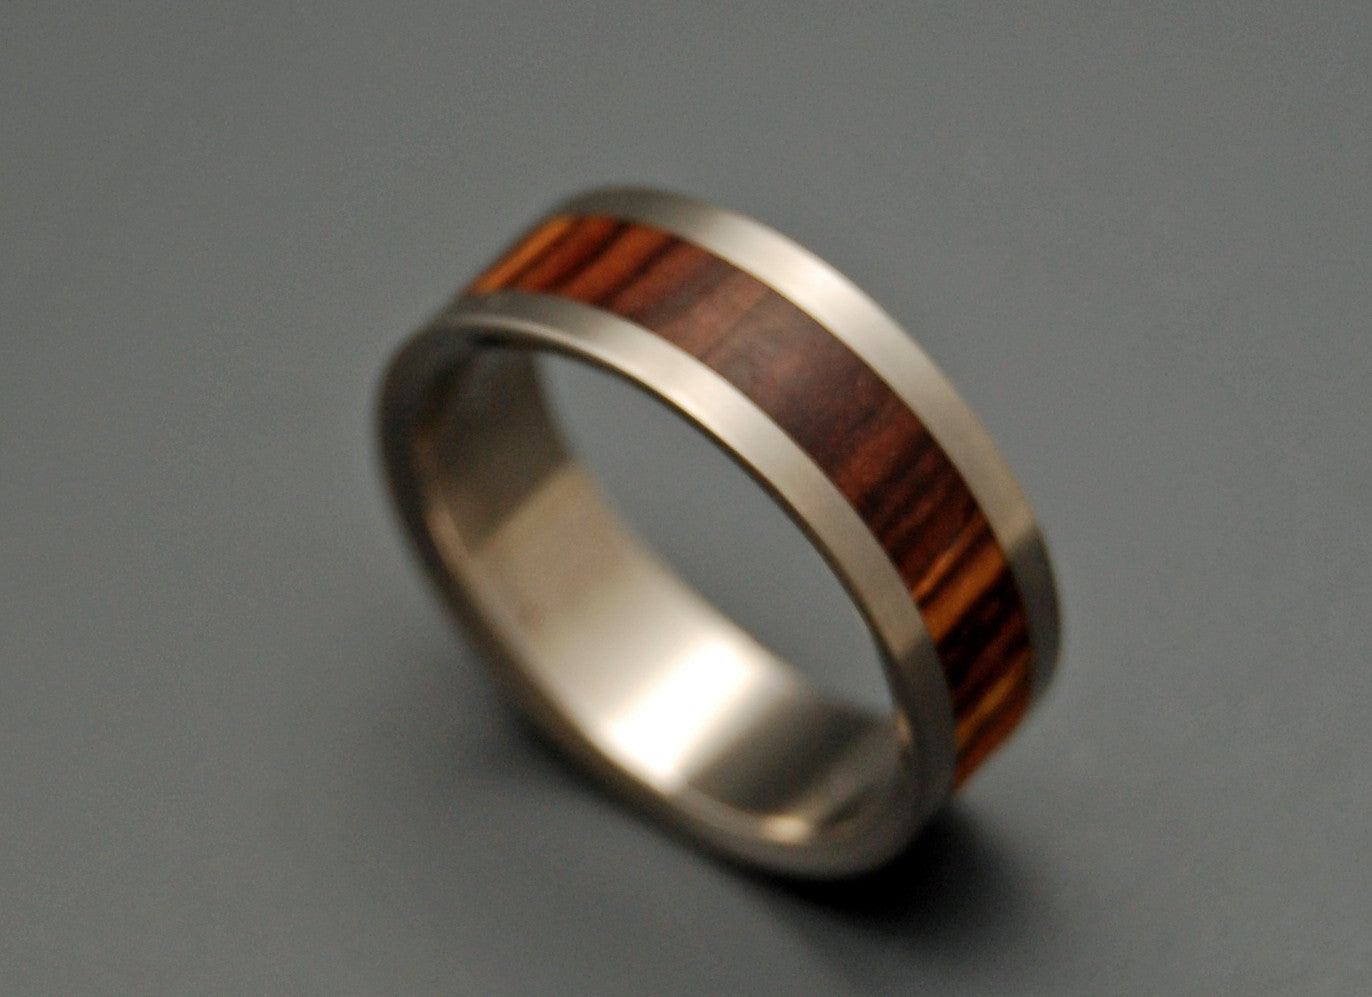 Standing Still | Wood and Titanium Wedding Rings - Minter and Richter Designs